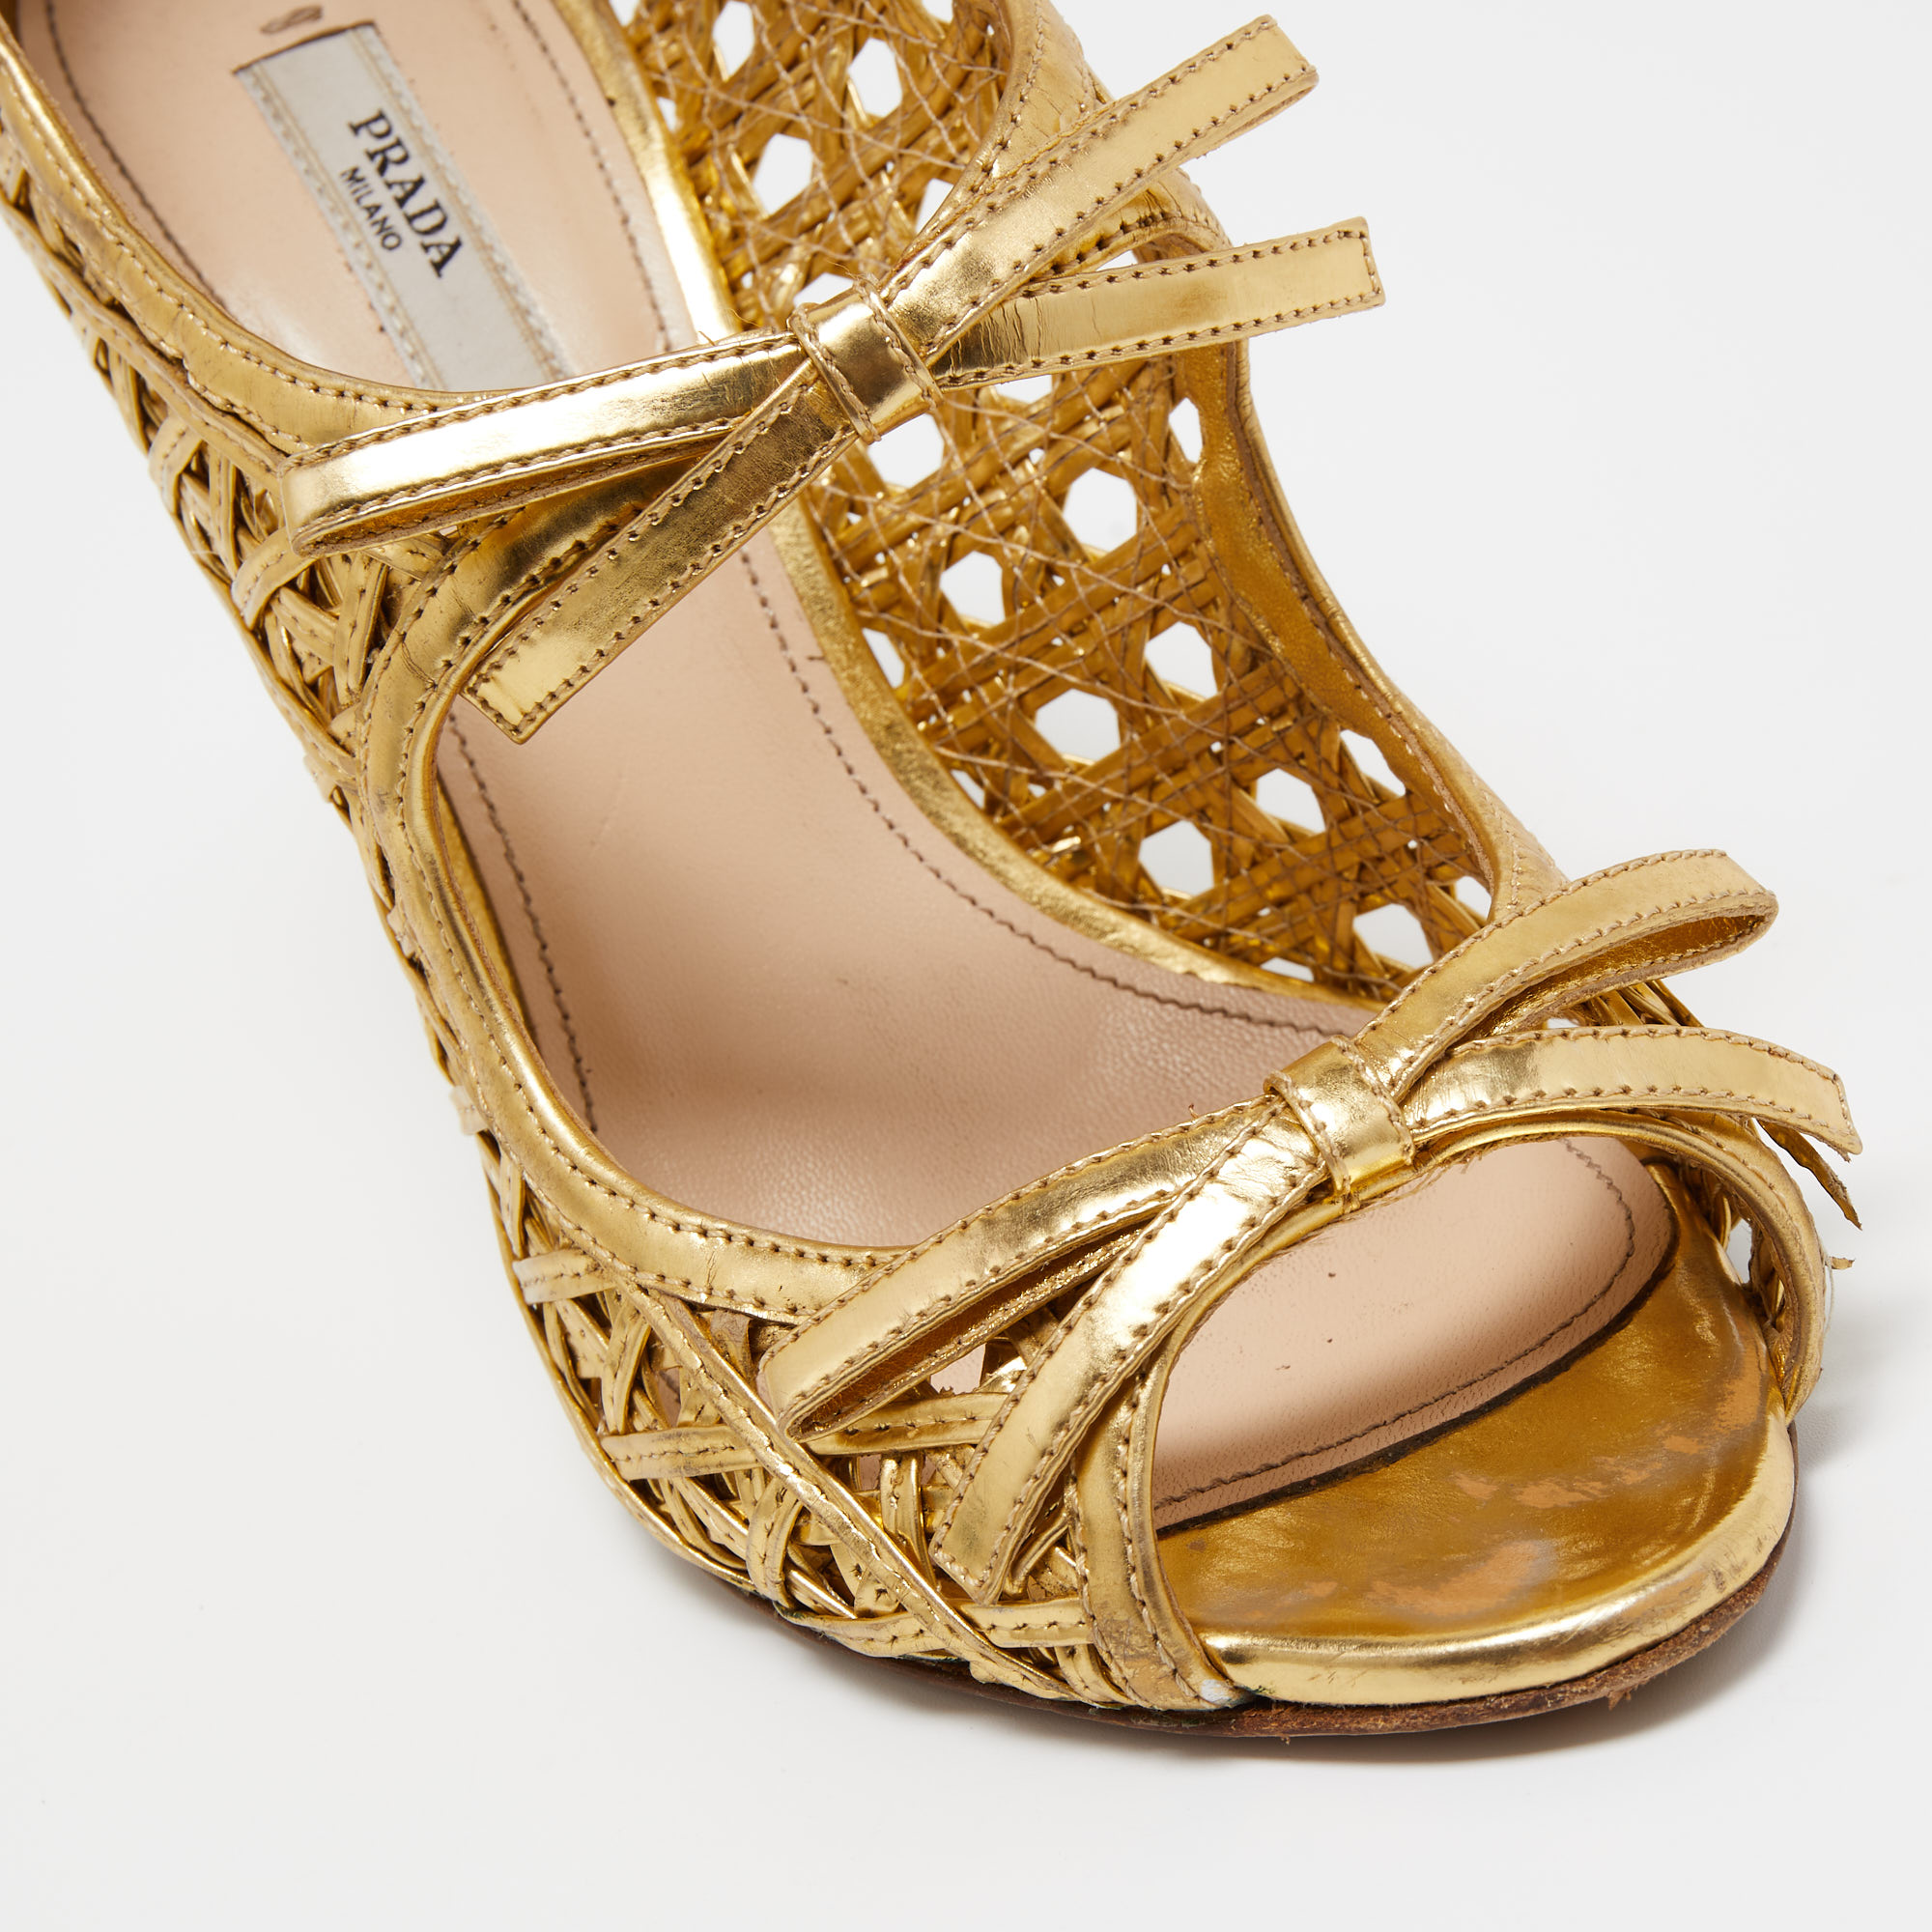 Prada Gold Leather Bow Open Toe Caged Sandals Size 38.5